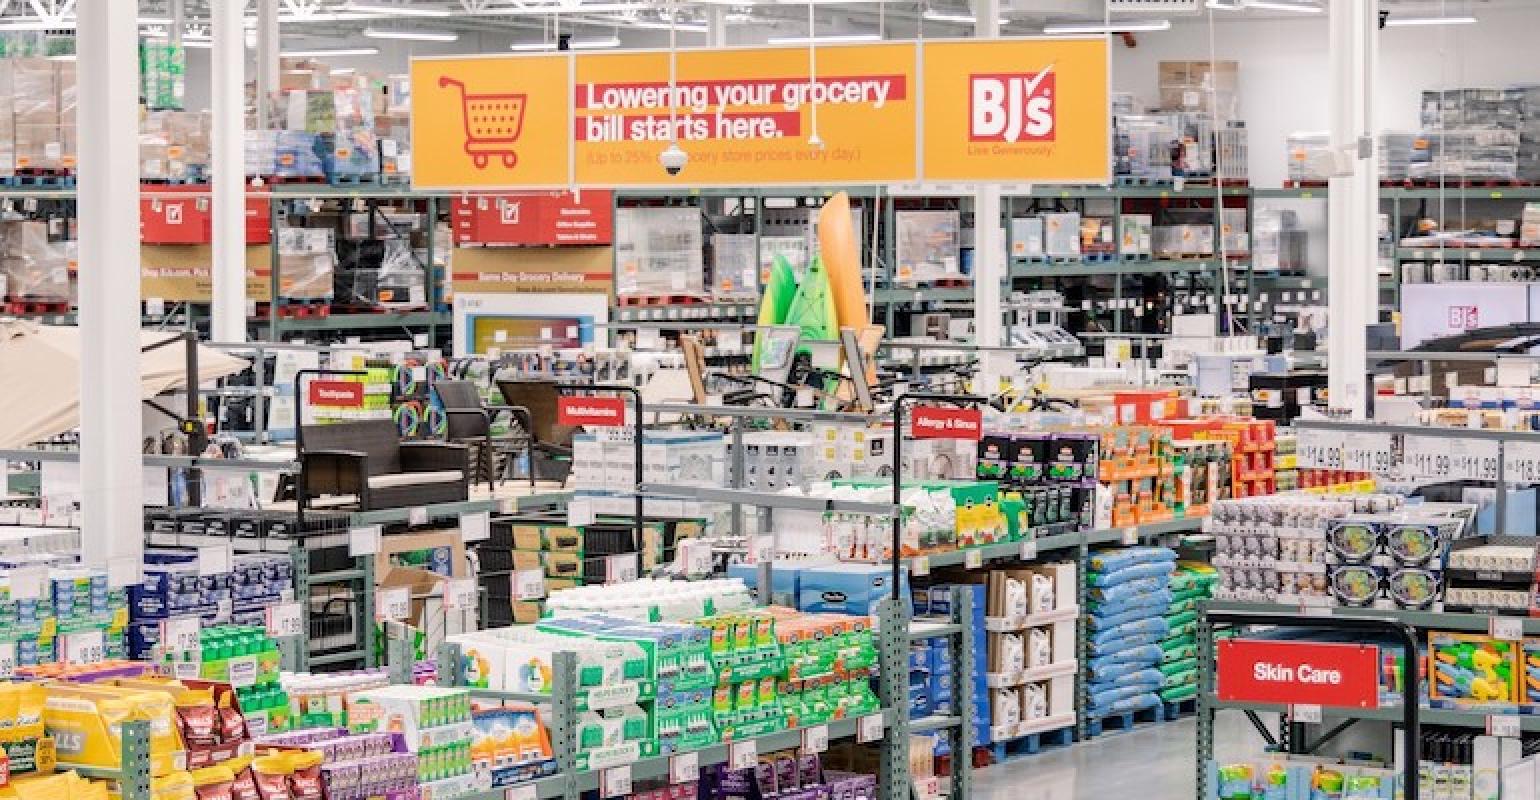 BJ’s plans flurry of club openings Supermarket News